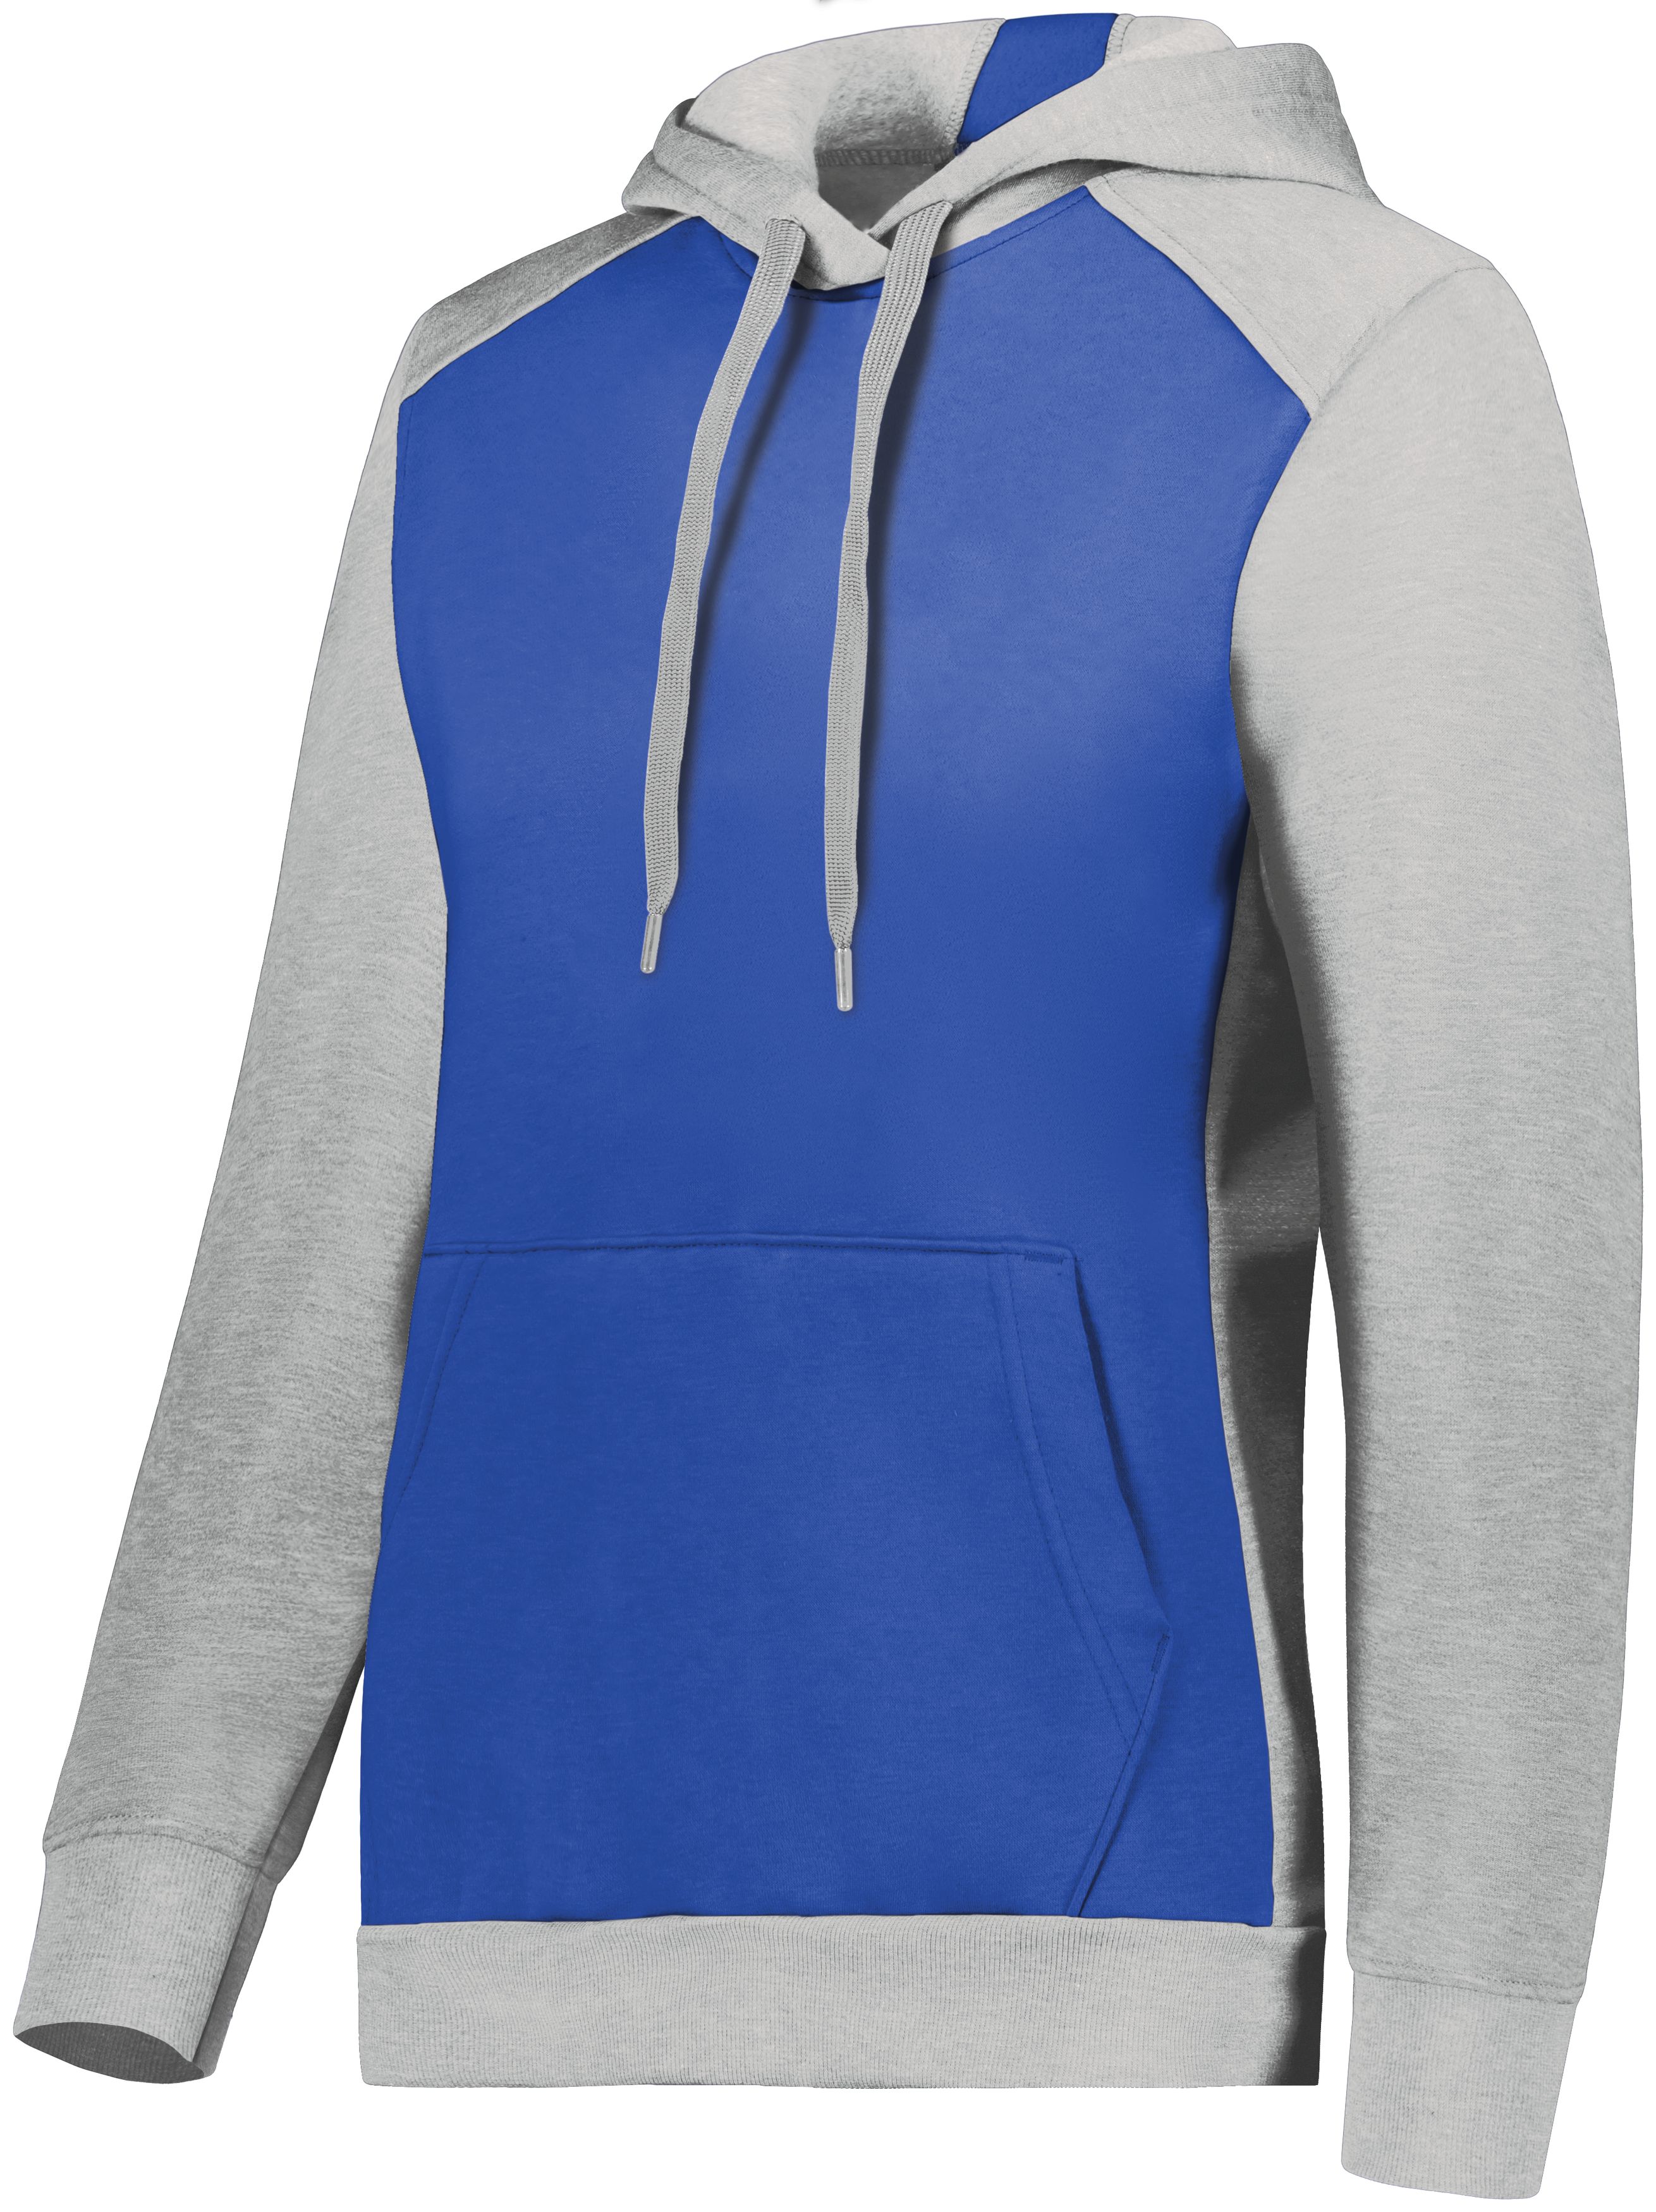 click to view Royal/Grey Heather